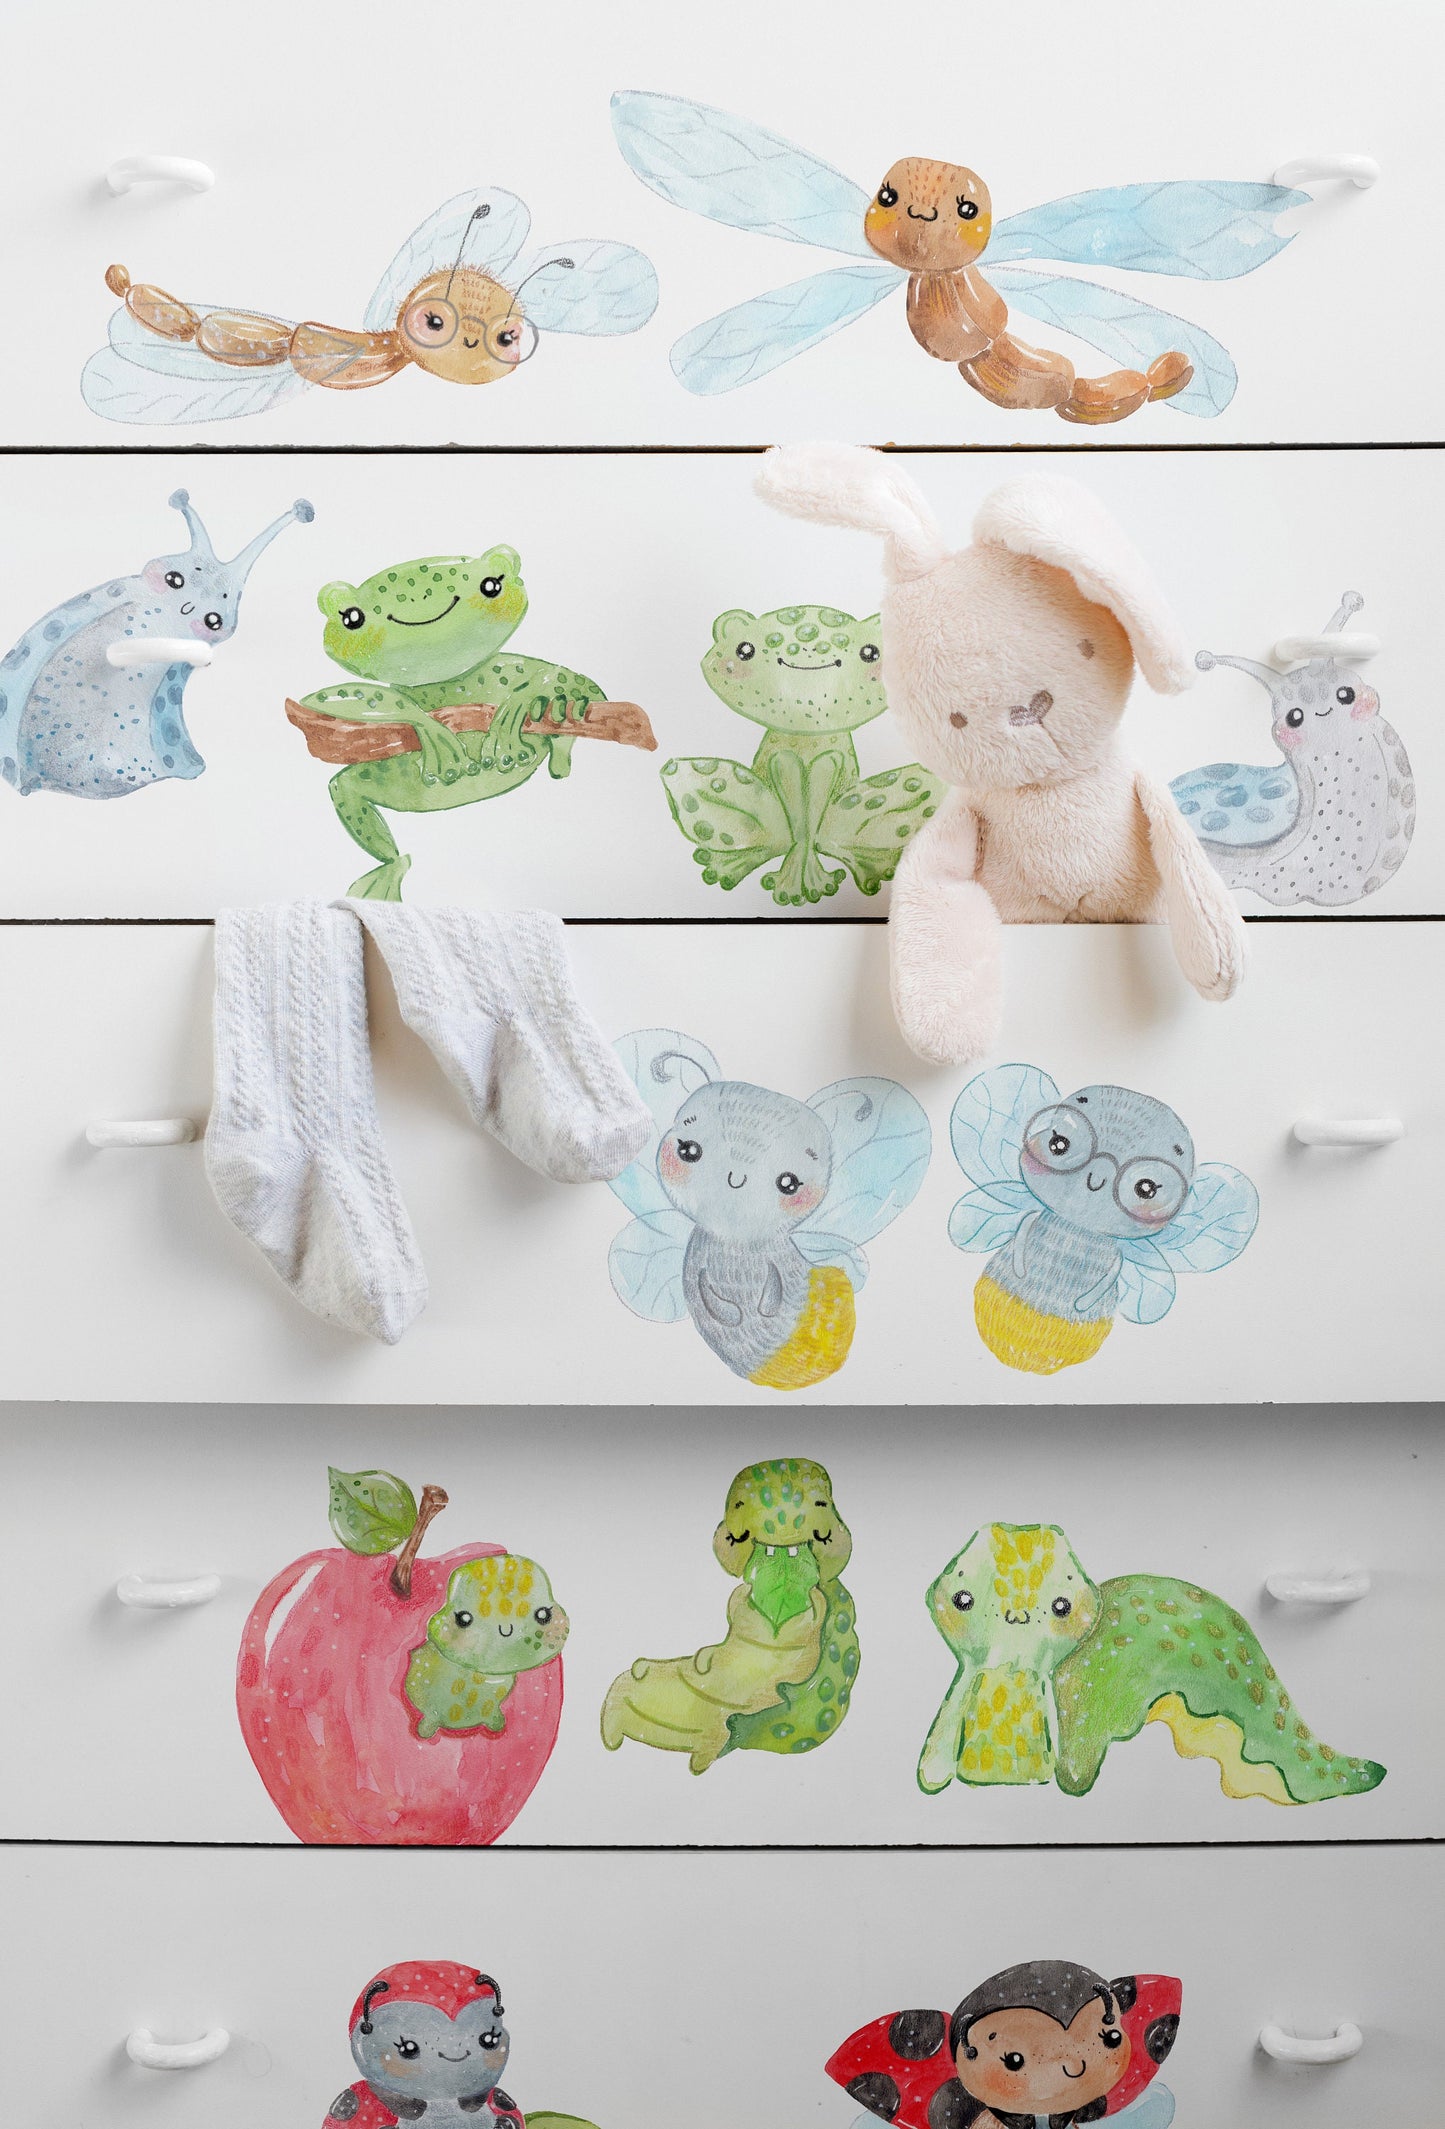 Bugs Wall Decals Butterfly Dragonfly Slug Snail Firefly Frog Bee Caterpillar Mushroom Watercolour Room Stickers, LF097